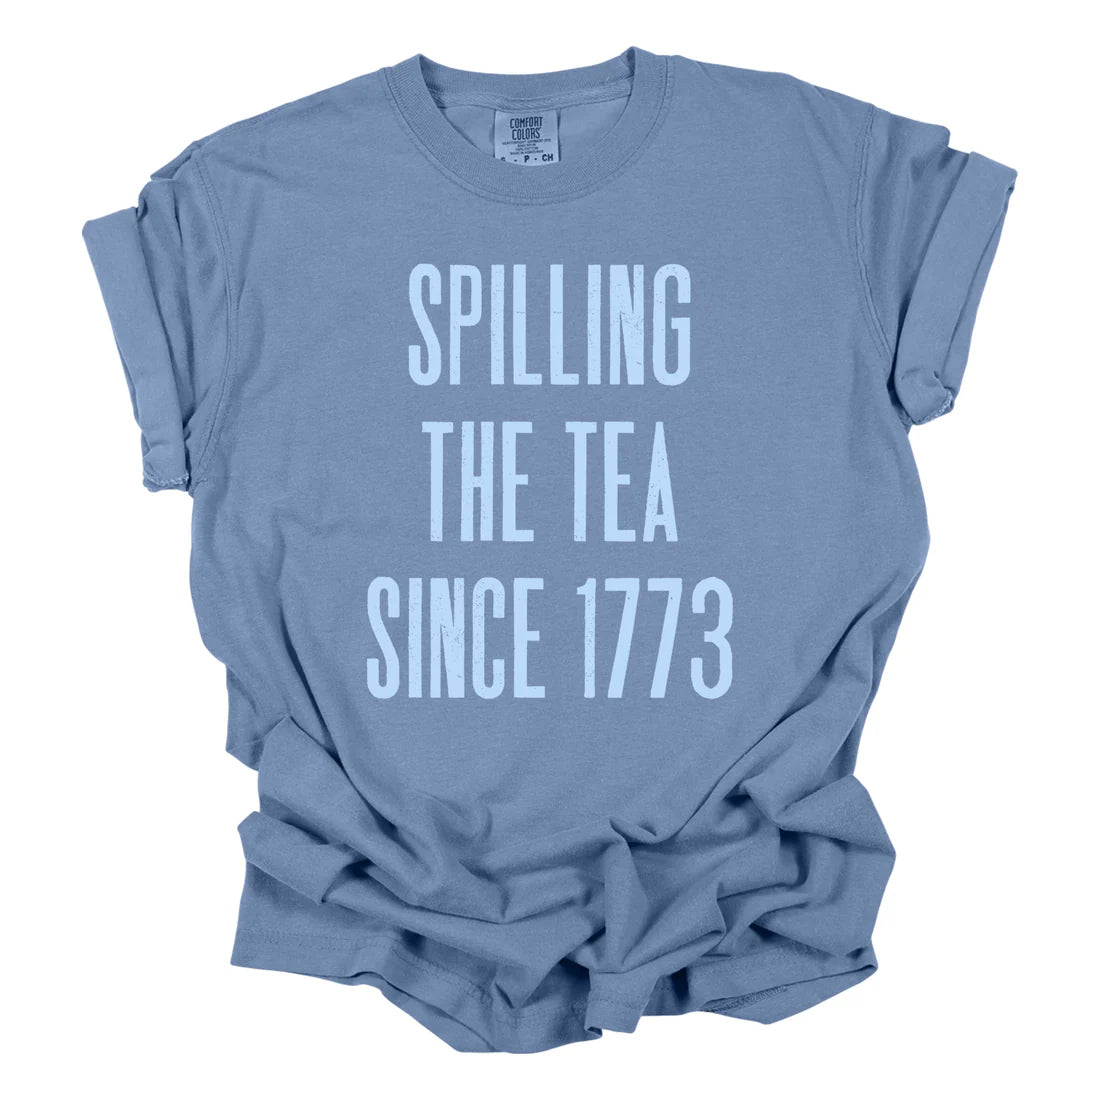 L ONLY Spilling the Tea Since 1773 Graphic Tee in washed denim